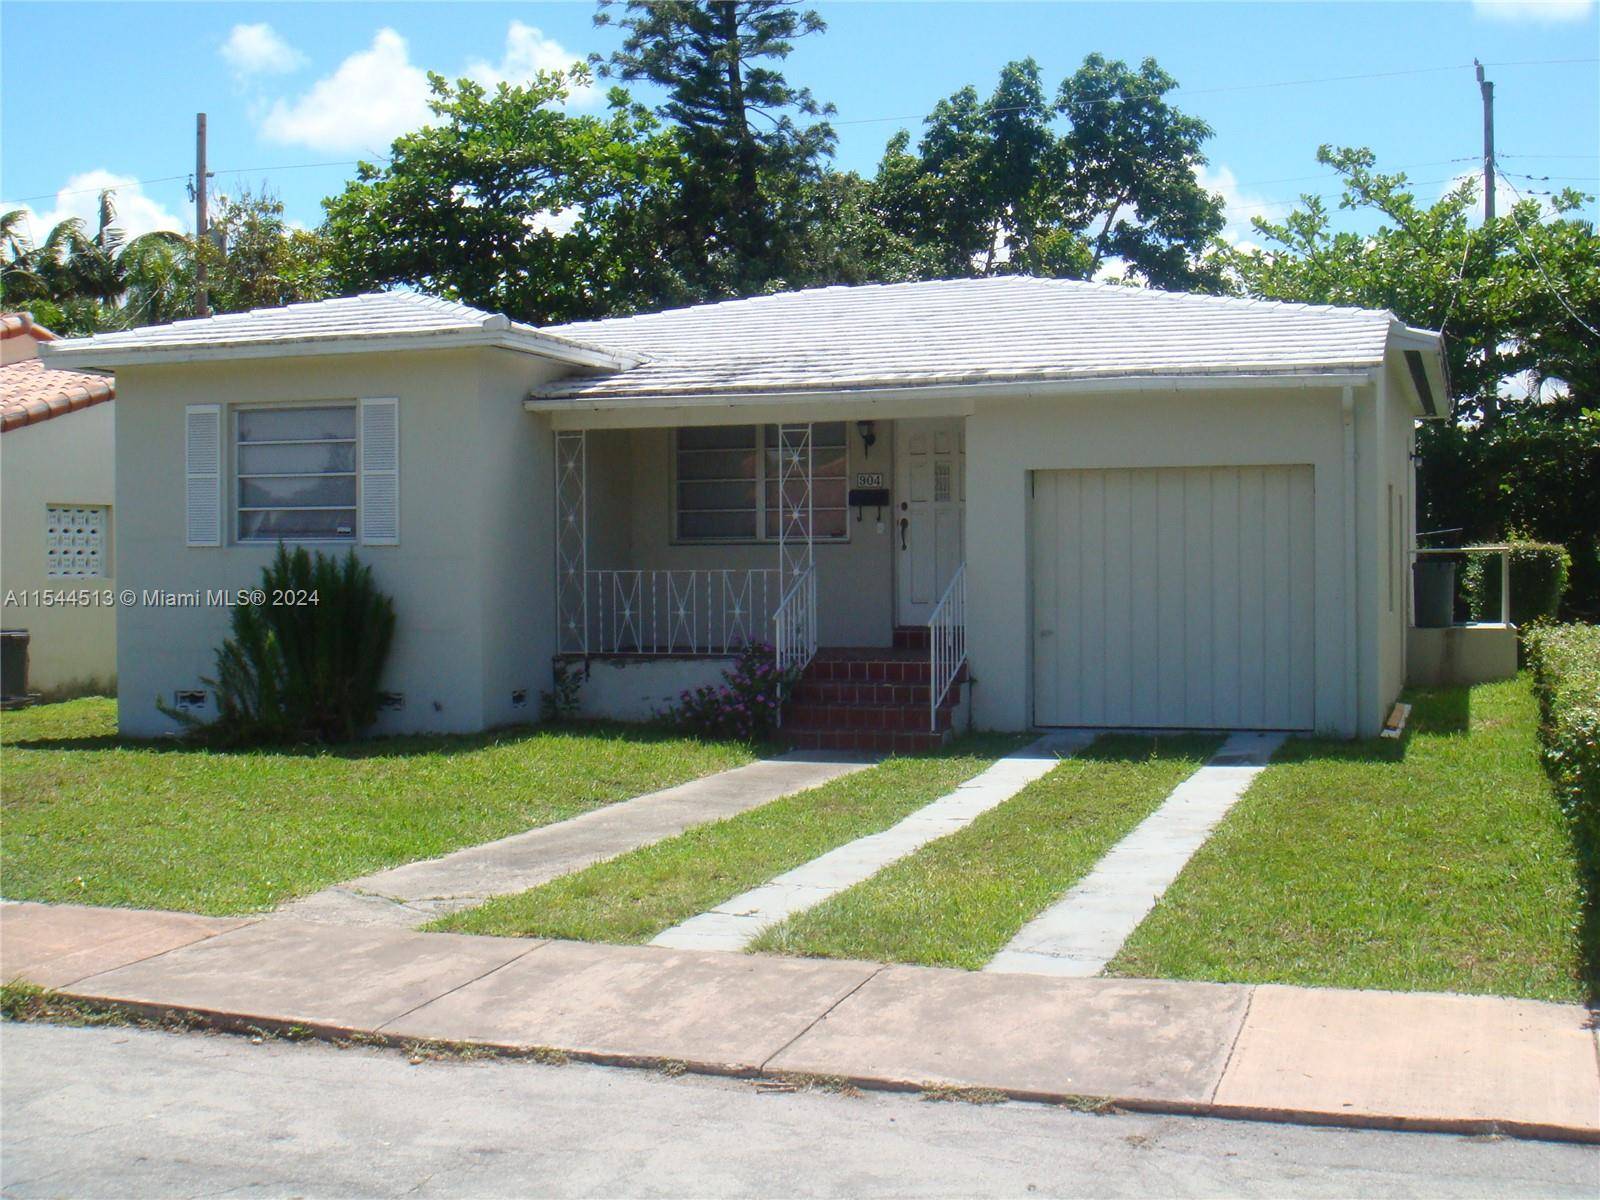 Charming 2 bedroom 1 bathroom home situated on a very private street in north Coral Gables.